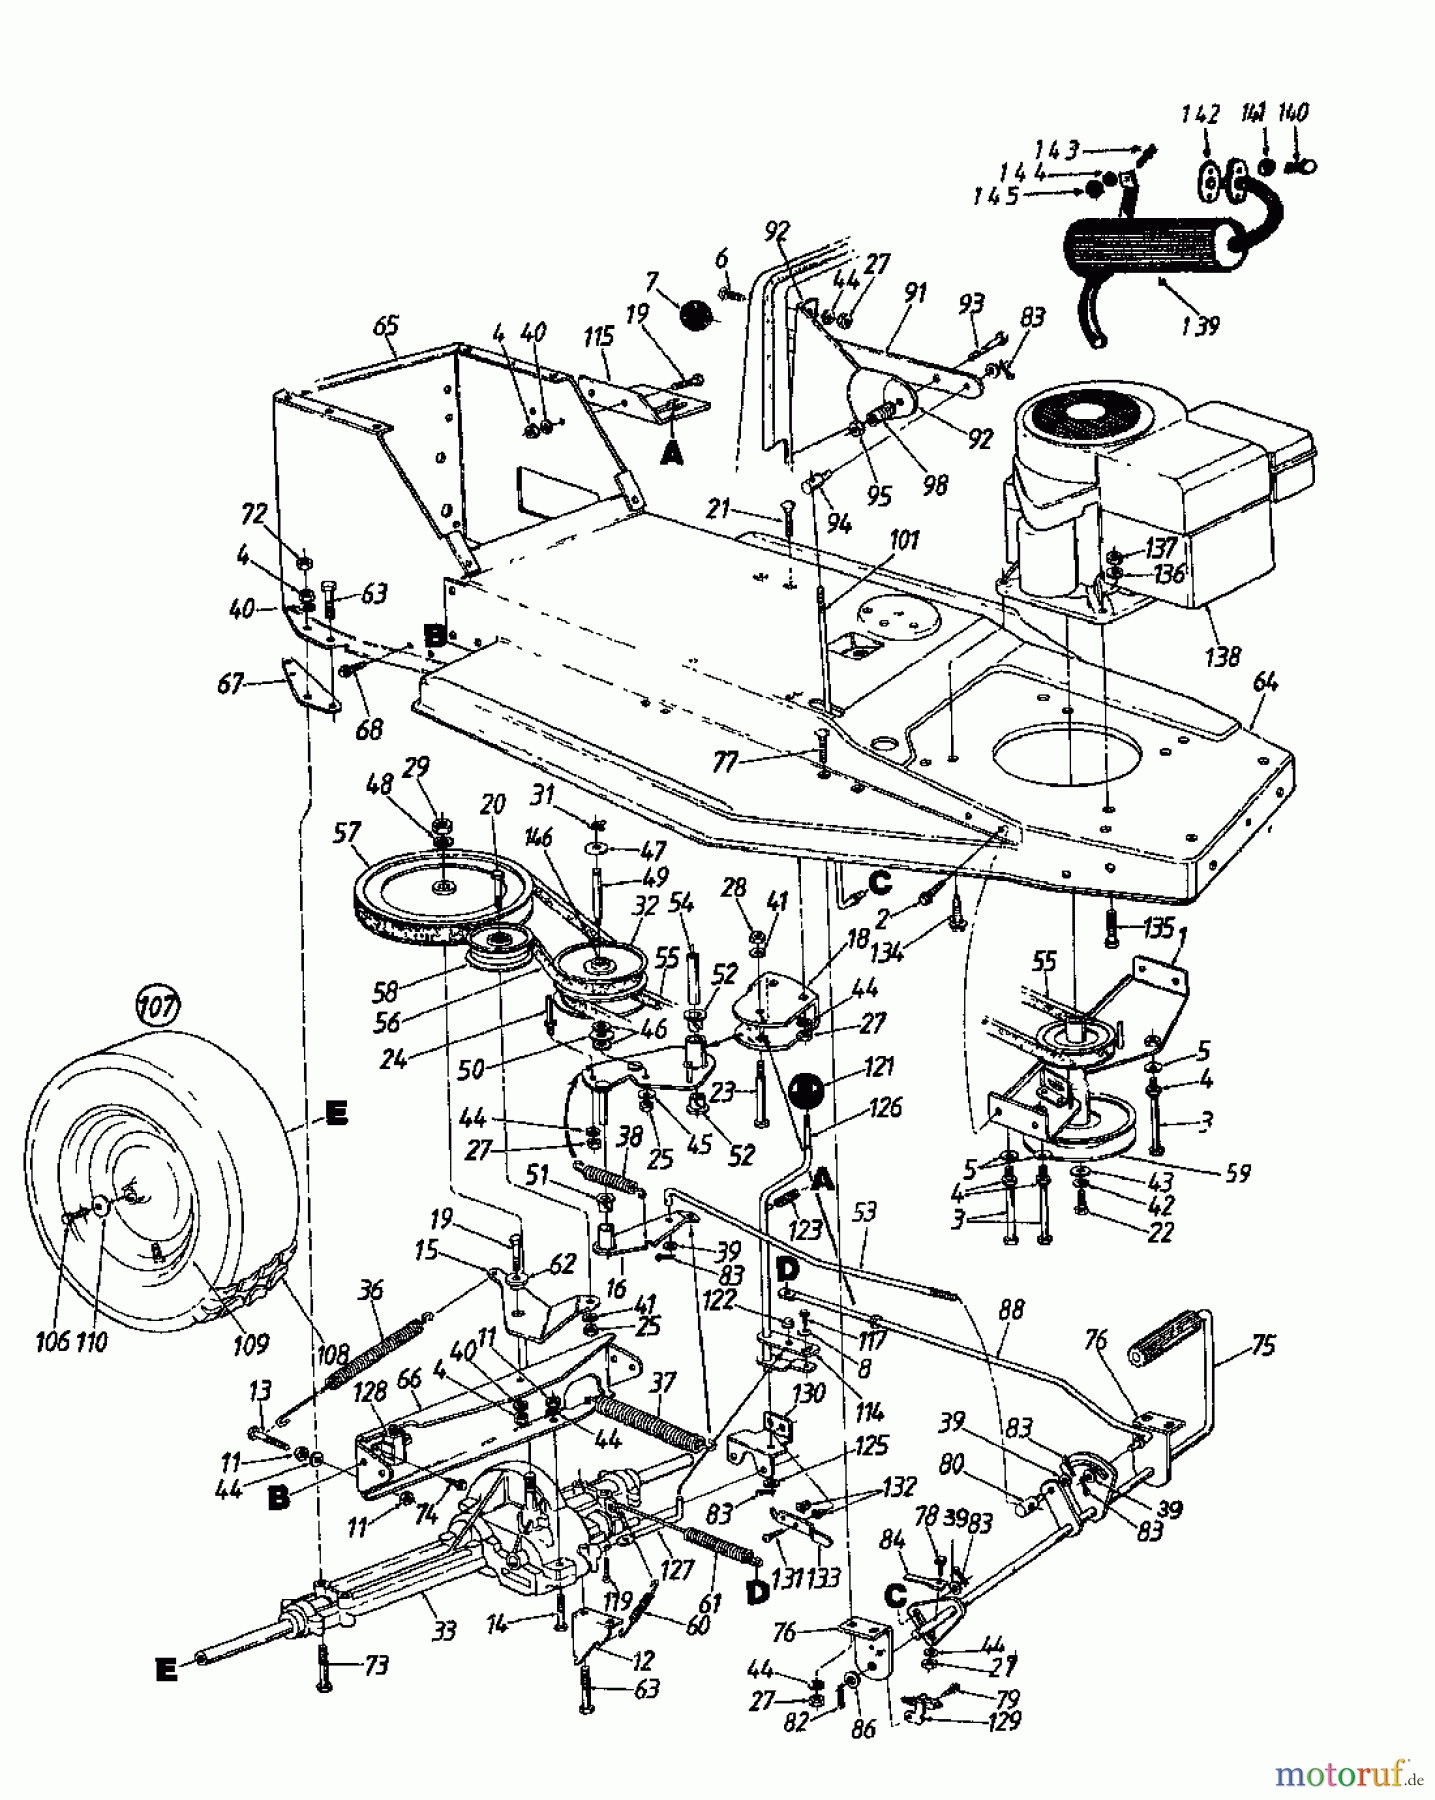  MTD Lawn tractors 11/81 137-3320  (1987) Drive system, Engine pulley, Pedal, Rear wheels